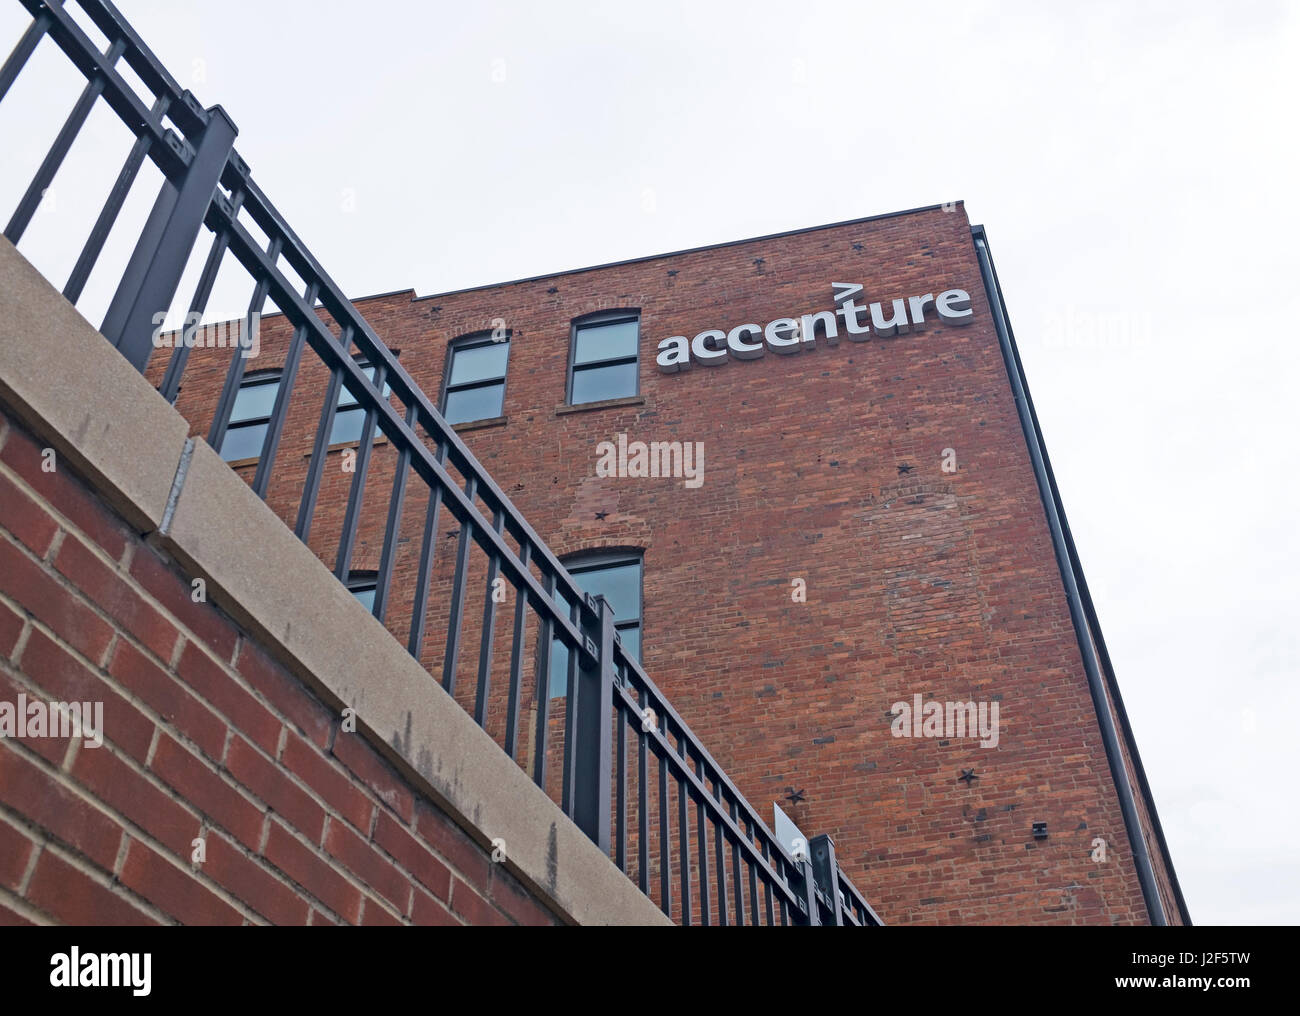 Accenture, the global business management and consulting firm, branch in Cleveland, Ohio, United States Stock Photo